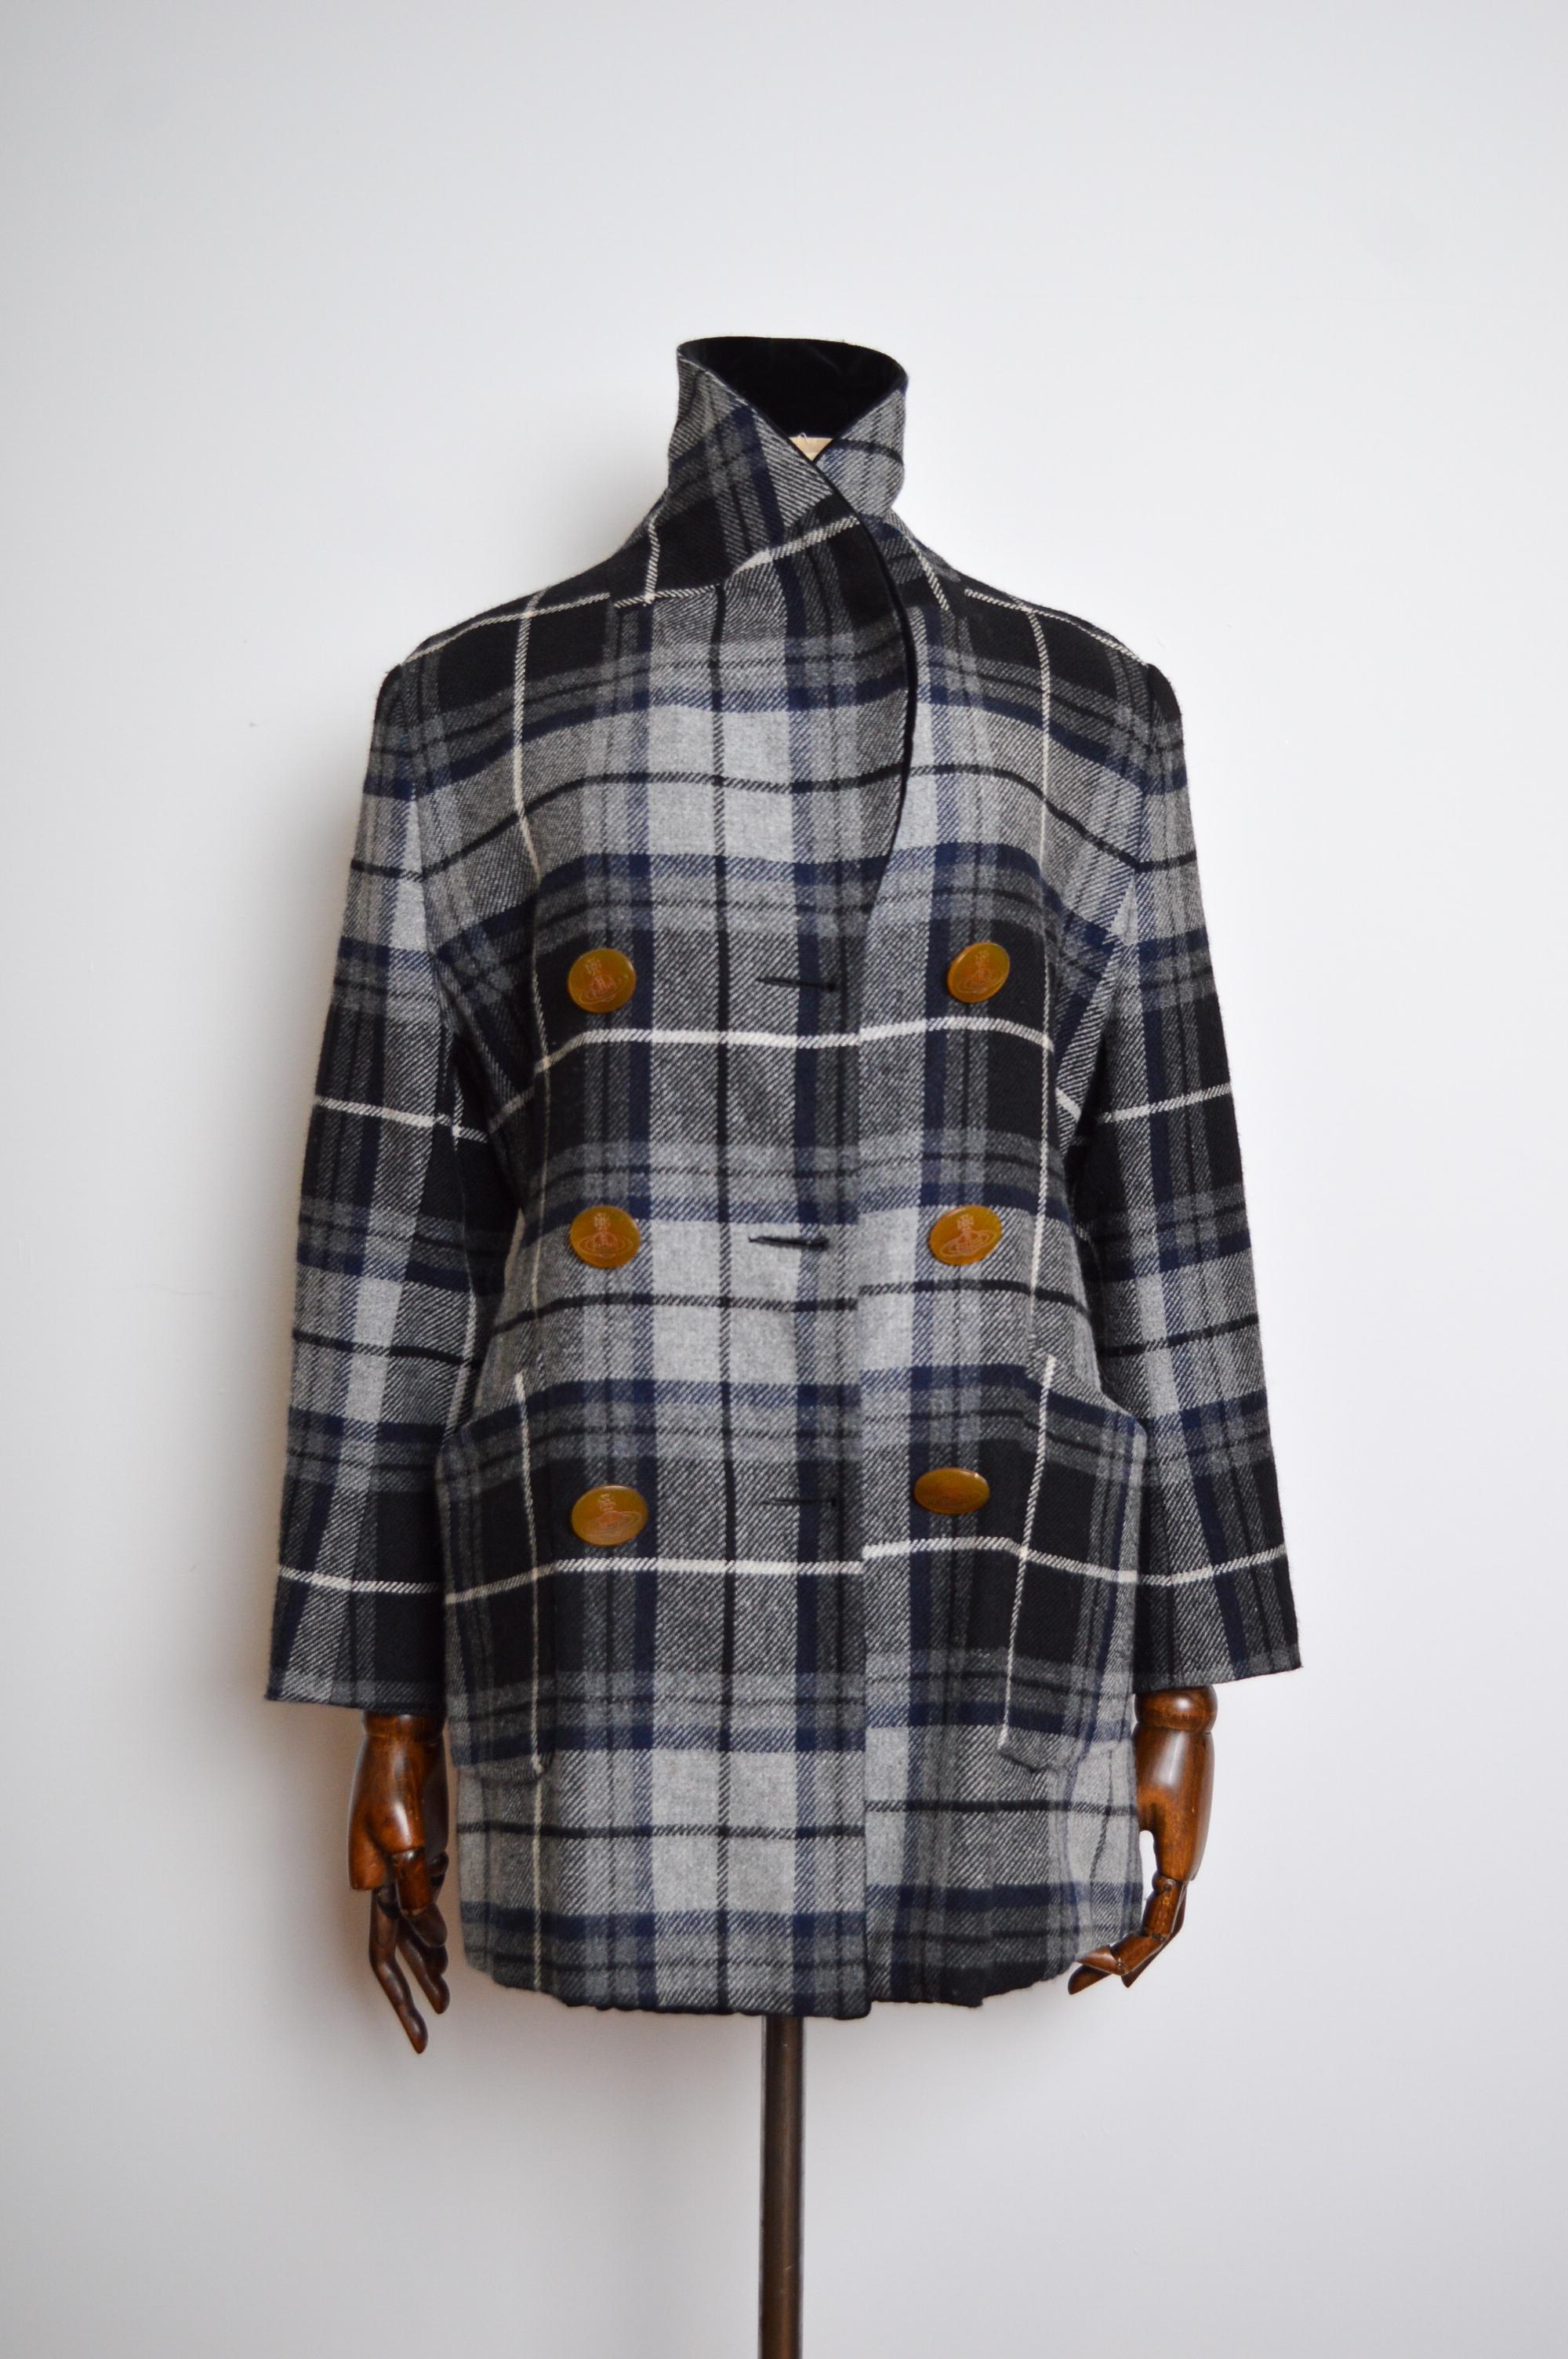 Rare Vivienne Westwood 3 Suisses AW 1995/ 1996 Collab Checked Tartan Wool Coat  For Sale 3